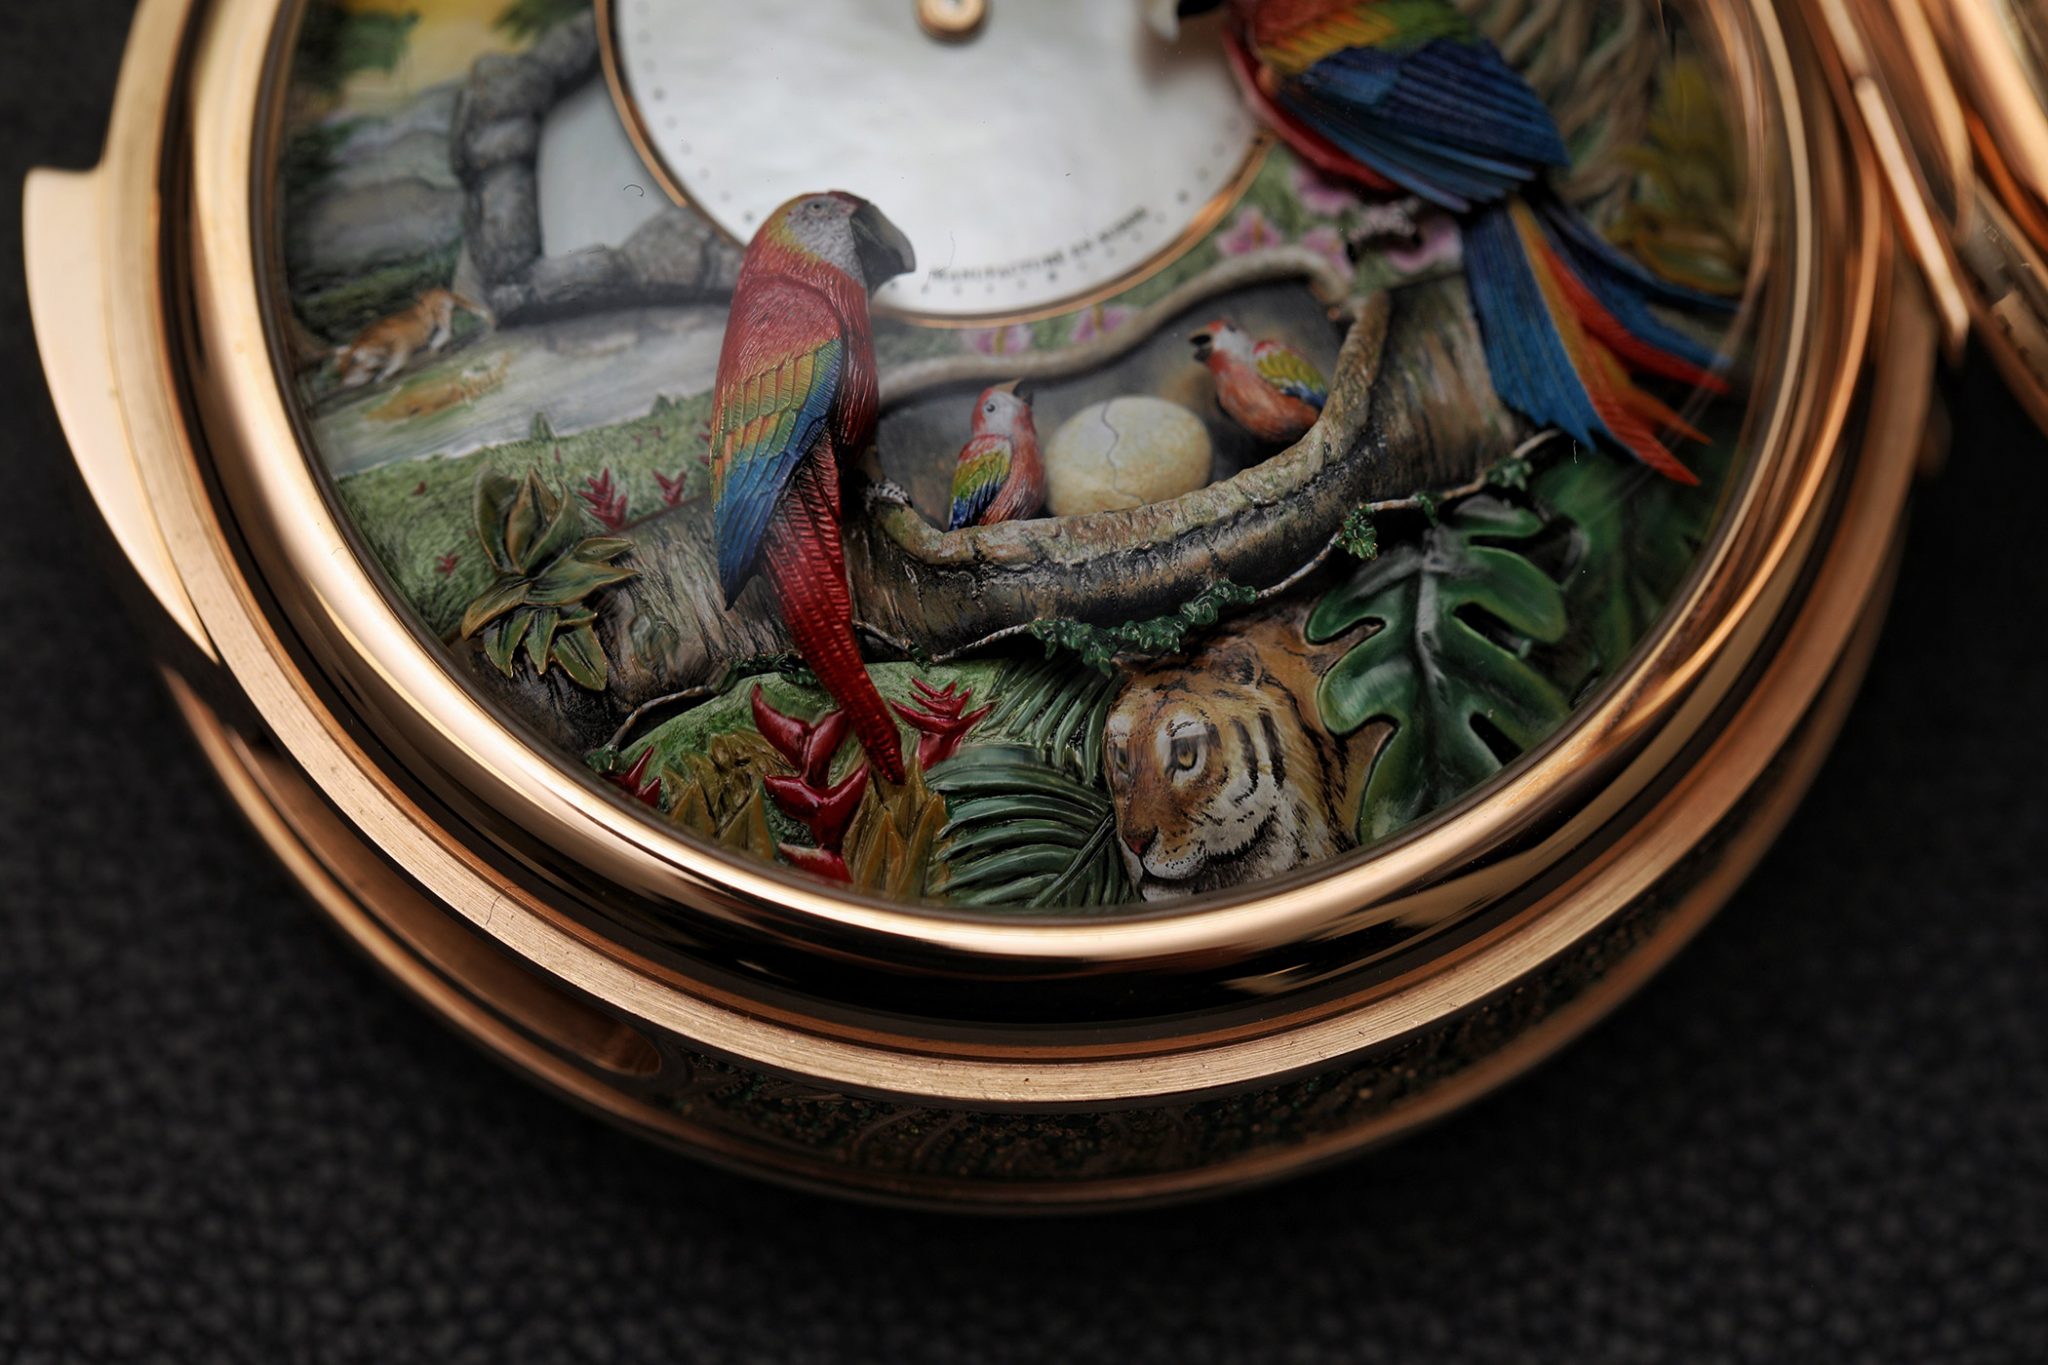 Jaquet Droz Manufacture the Parrot Repeater Pocket Watch with Automata